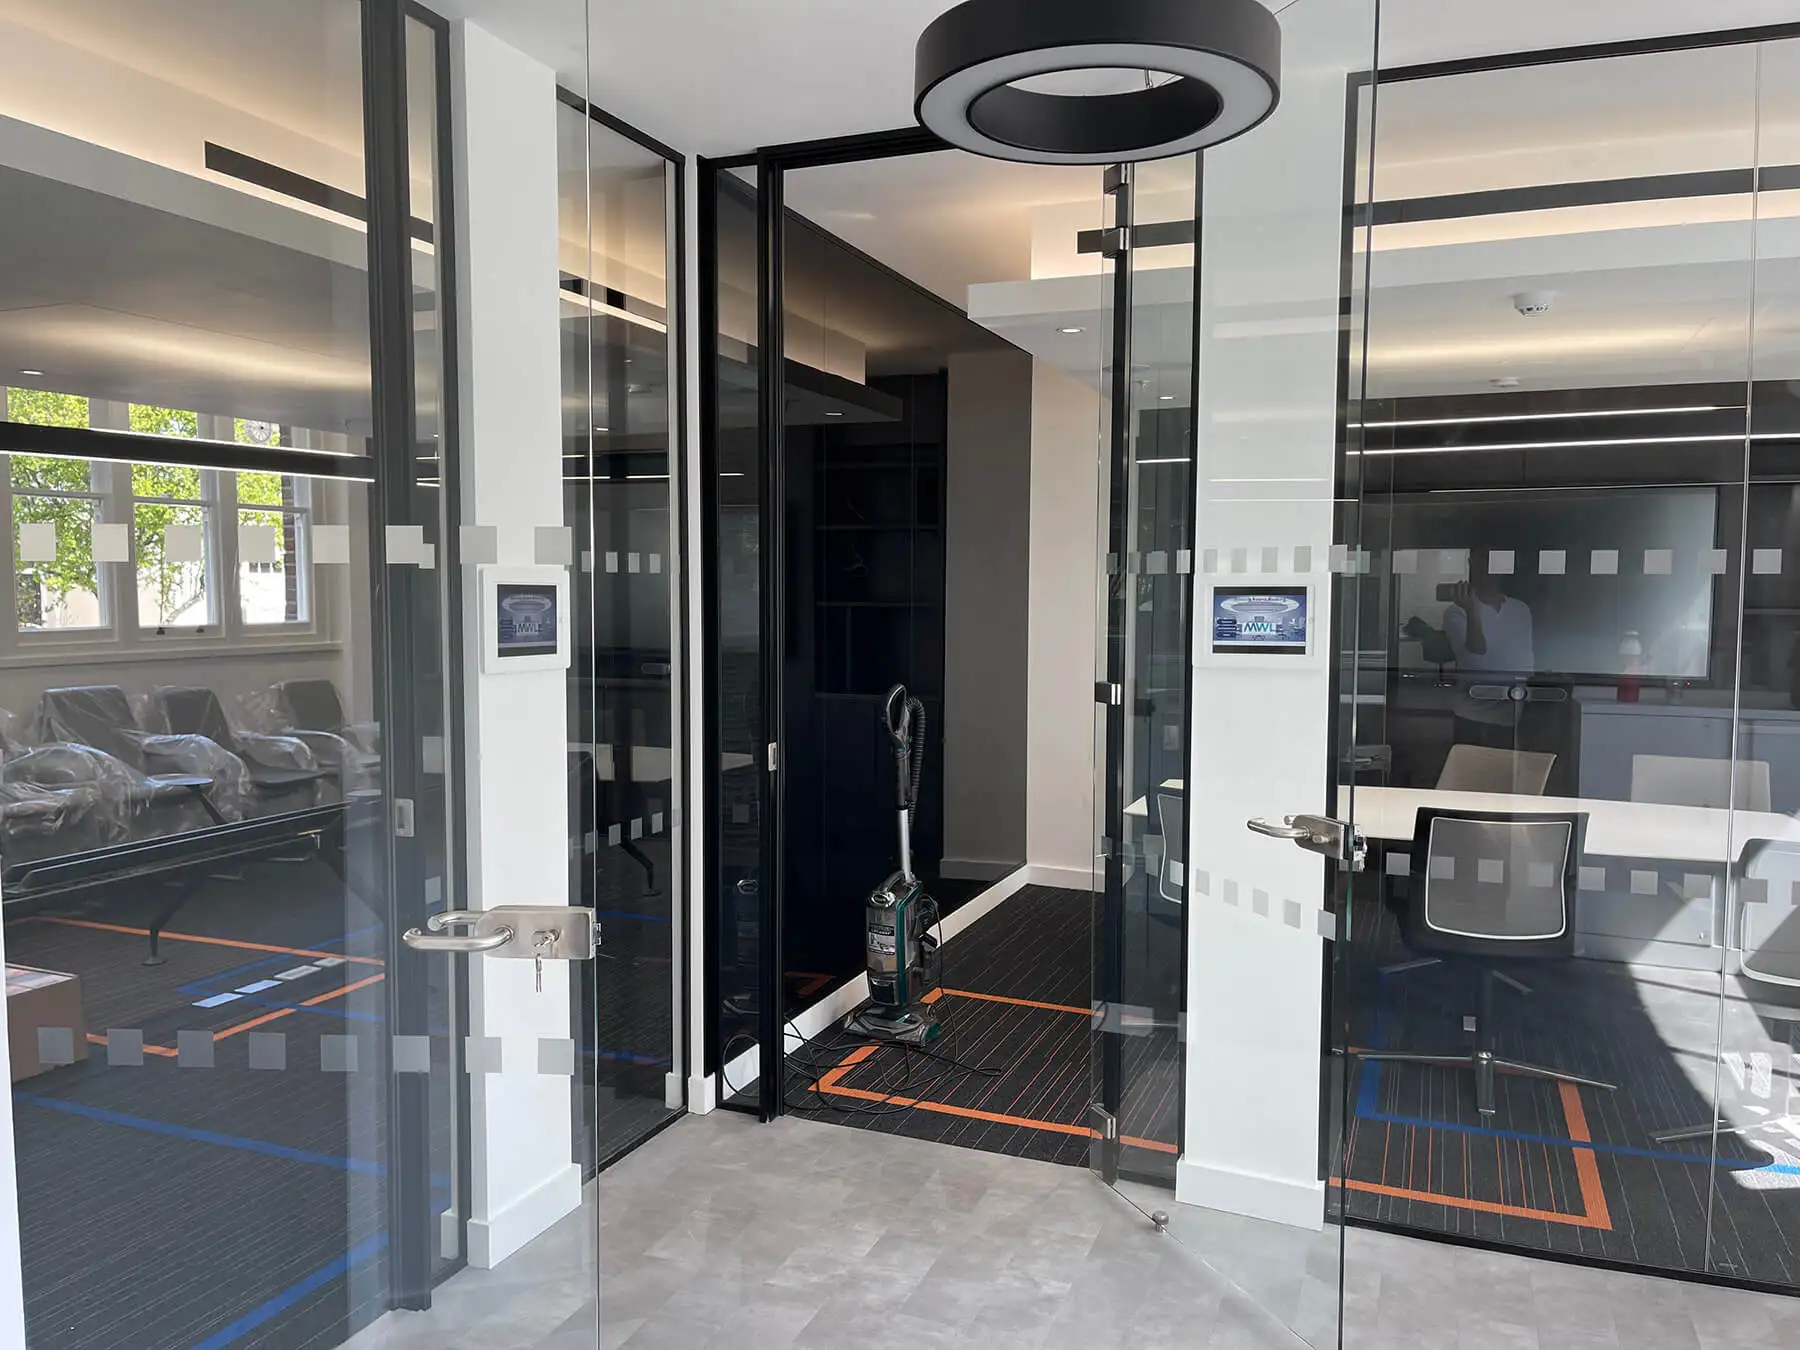 Office space with Black framed glass walls and doors